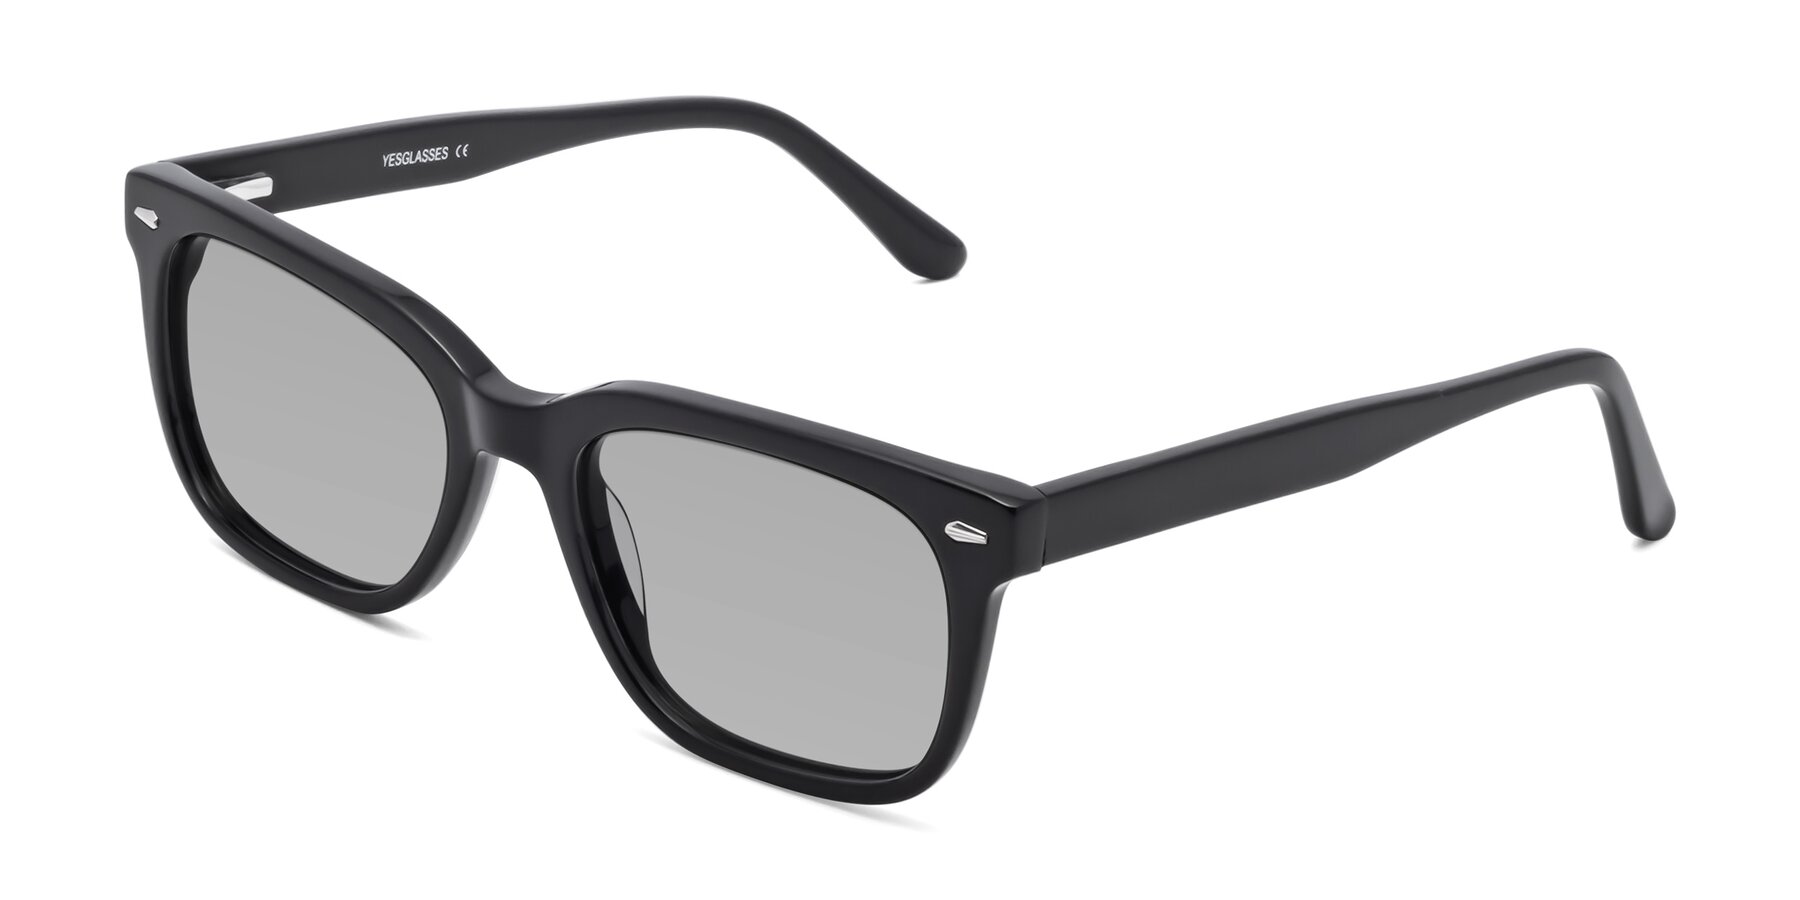 Angle of 1052 in Black with Light Gray Tinted Lenses